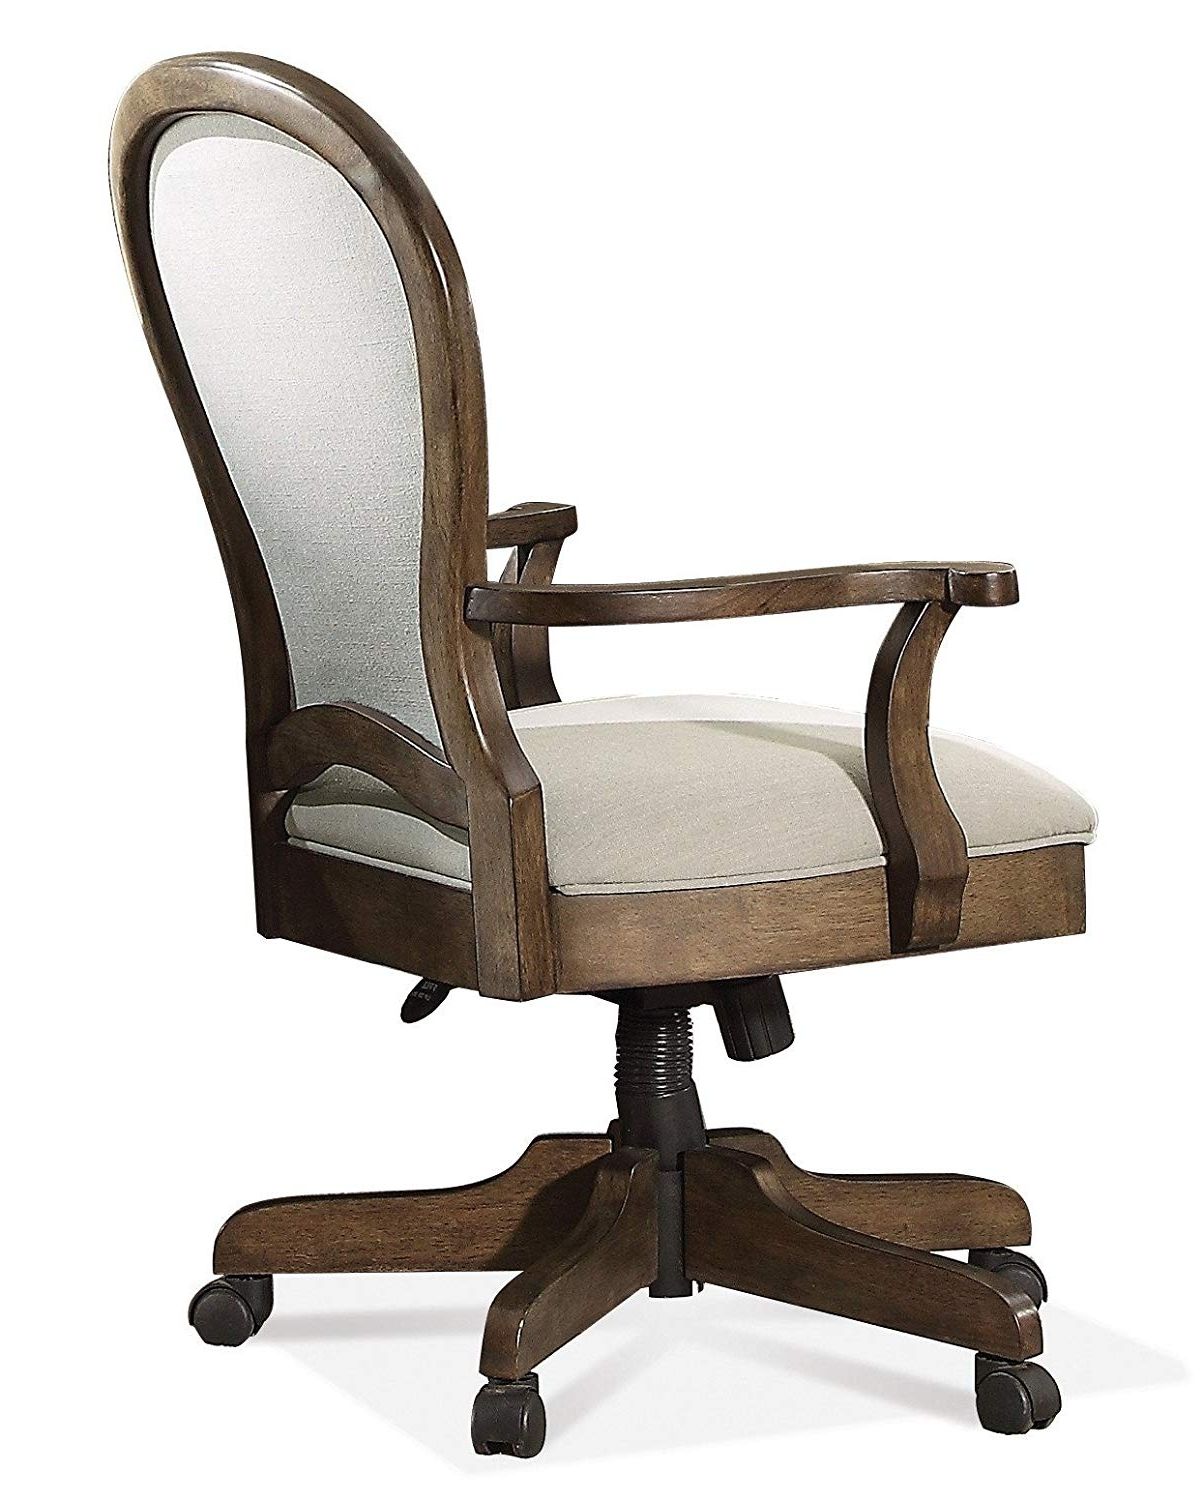 Belmeade Side Chairs In Most Recently Released Amazon: Riverside Belmeade Upholstered Desk Chair In Old World (View 16 of 20)